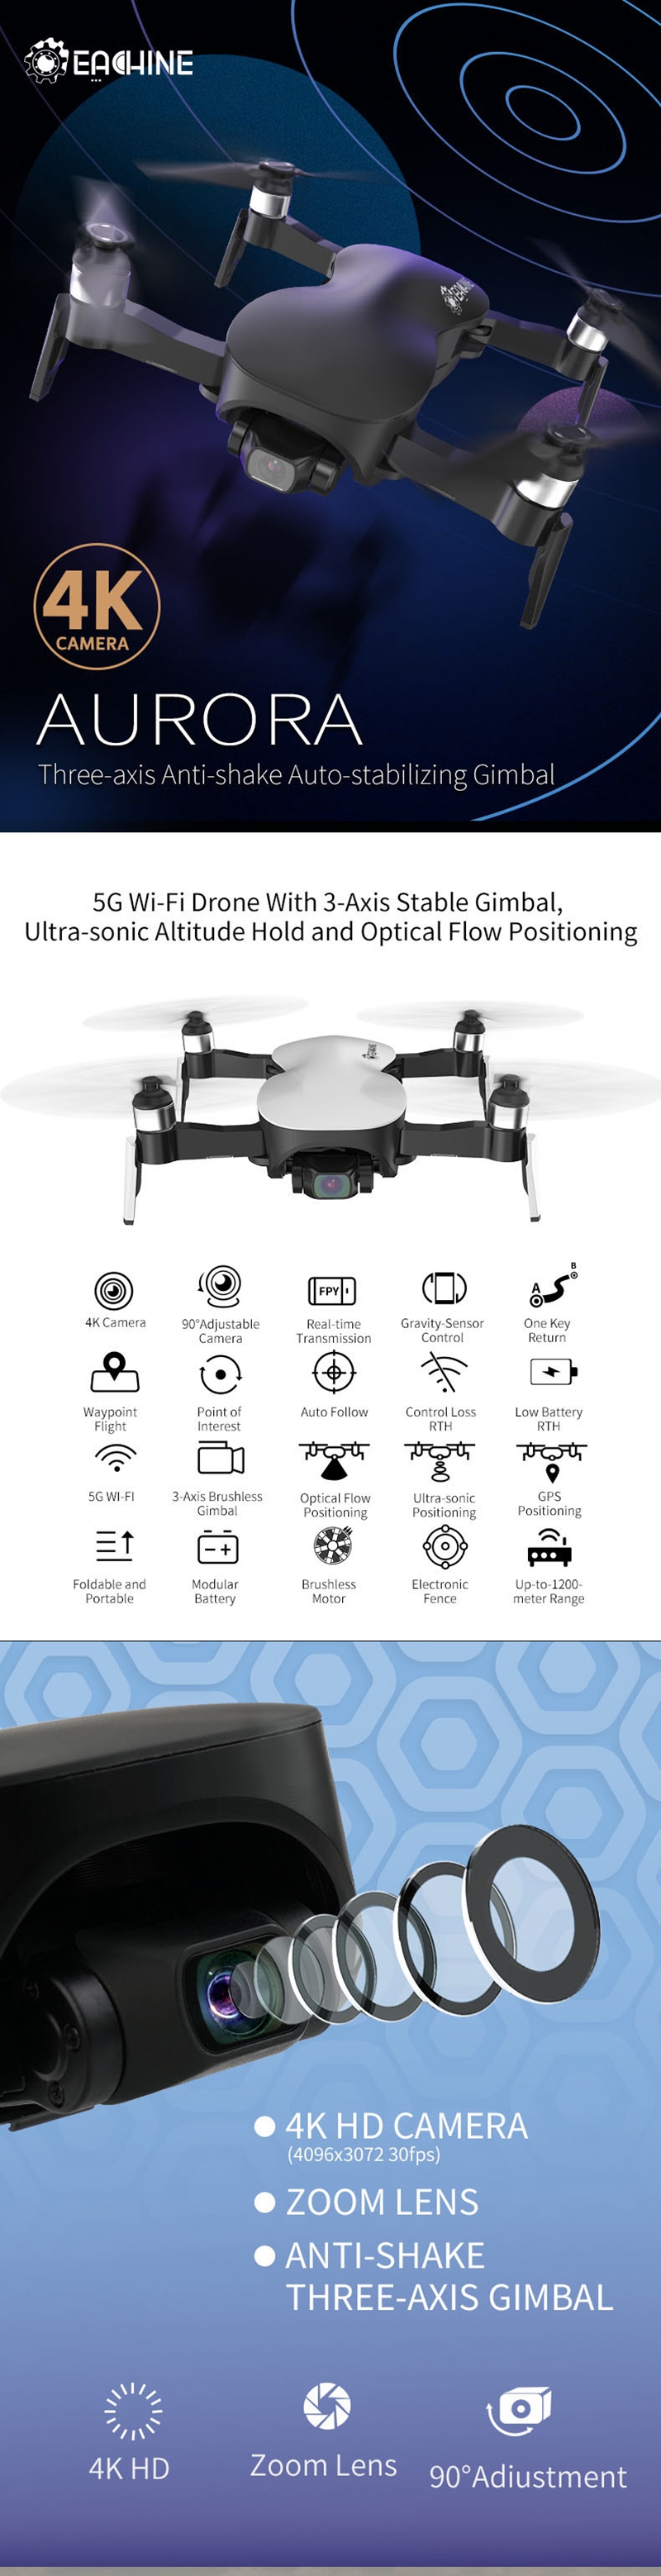 Eachine EX4 5G WIFI 1.2KM FPV GPS With 4K HD Camera 3-Axis Stable Gimbal 25 Mins Flight Time RC Drone Quadcopter RTF